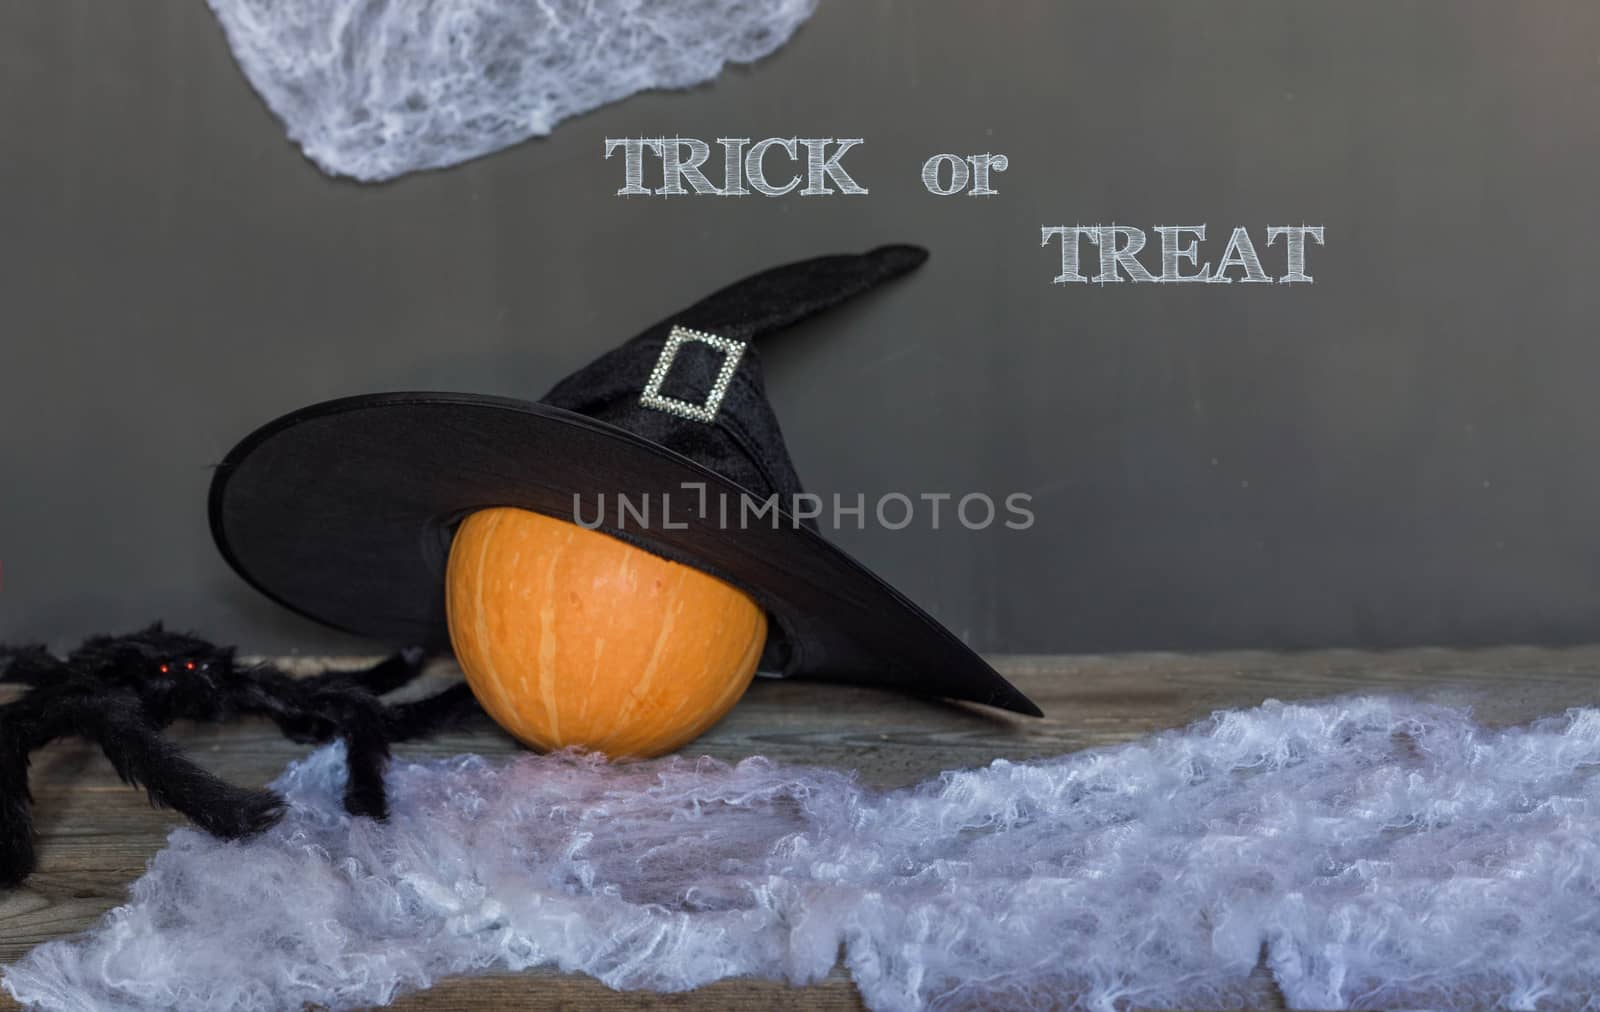 Trick or treat greeting text over dark wooden and Blackboard background. by galinasharapova